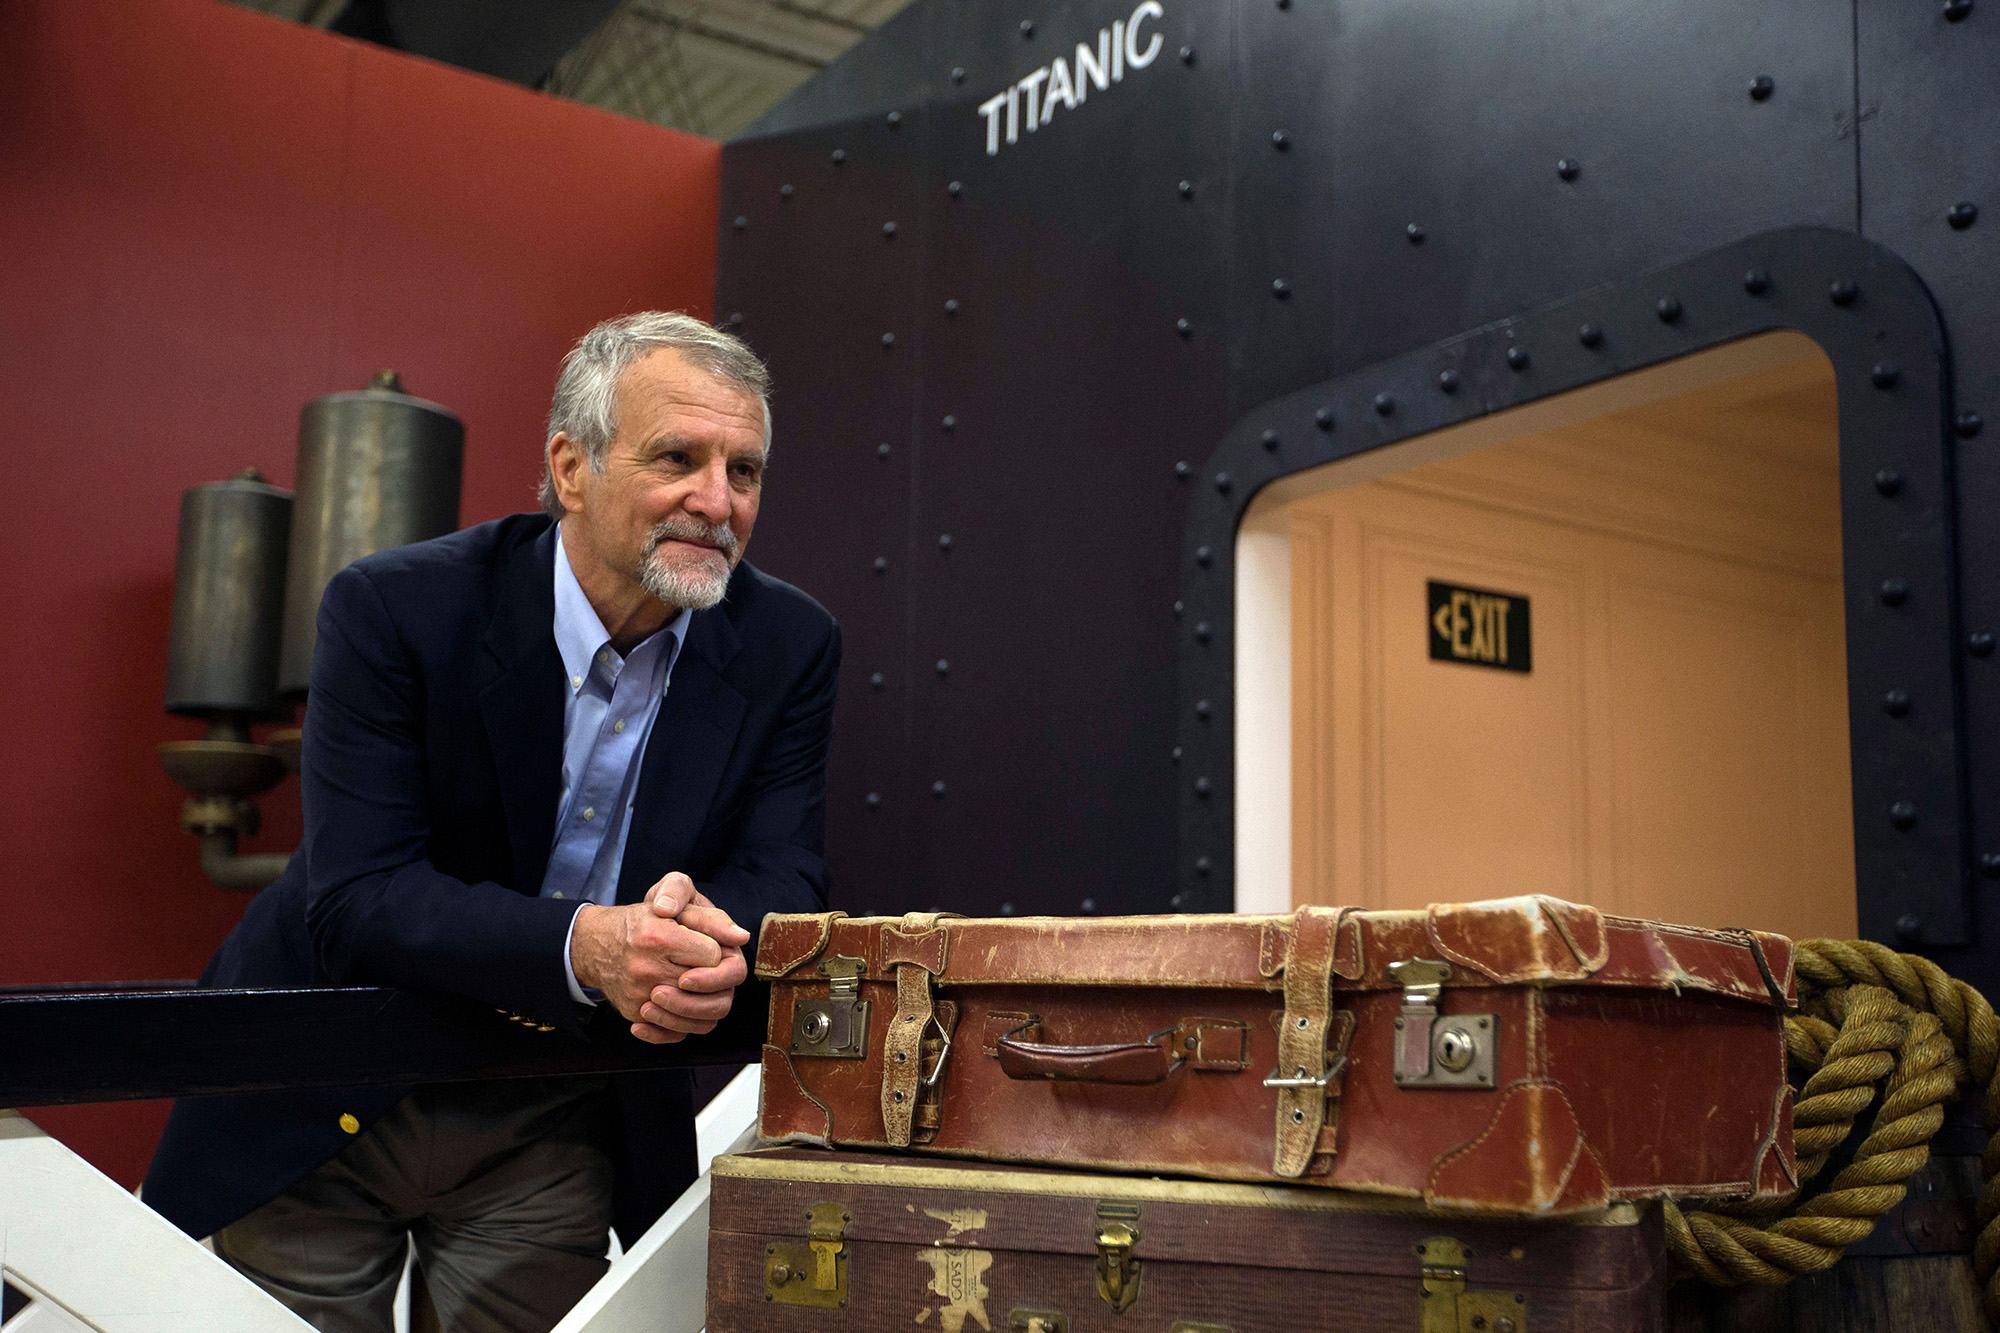 Paul-Henri Nargeolet, director of a deep ocean research project dedicated to the Titanic, poses inside the new exhibition dedicated to the sunken ship, at 'Paris Expo', on May 31, 2013, in Paris, France.